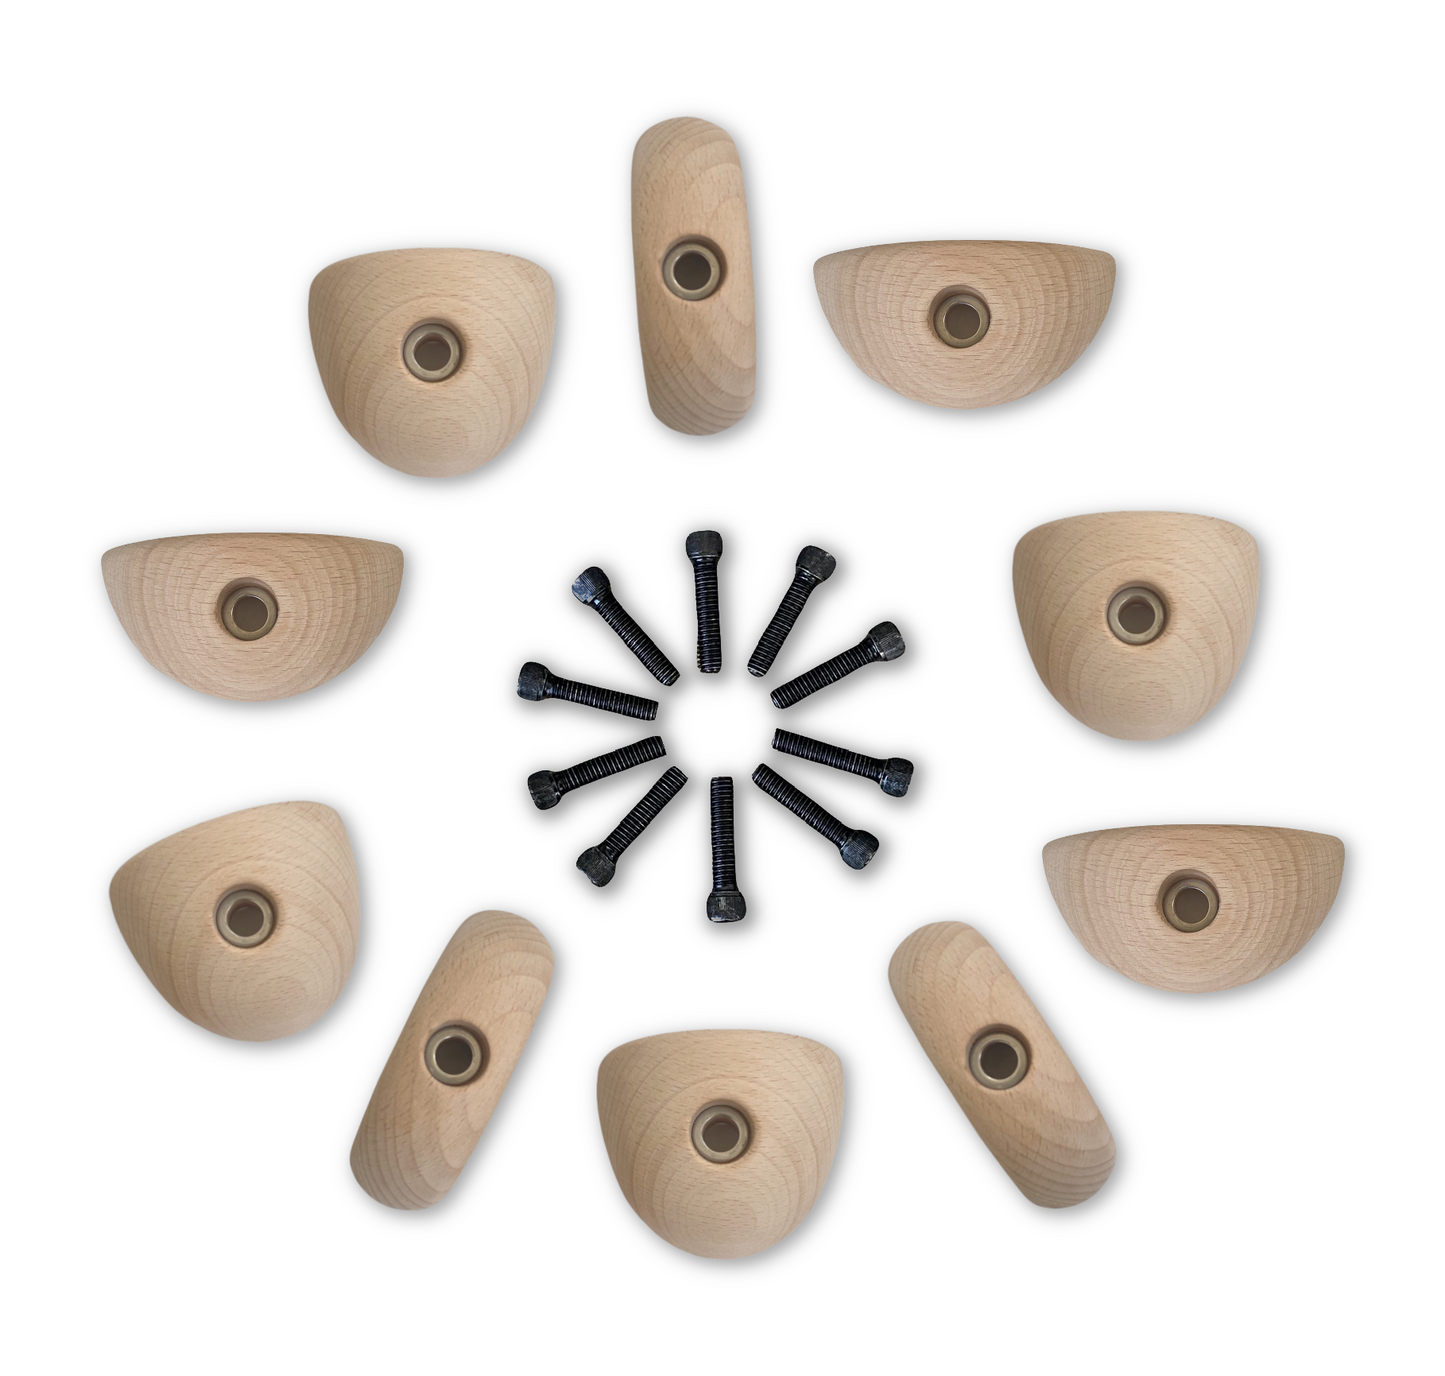 Set of 10 Wooden Climbing Holds, Kid's Variety Pack